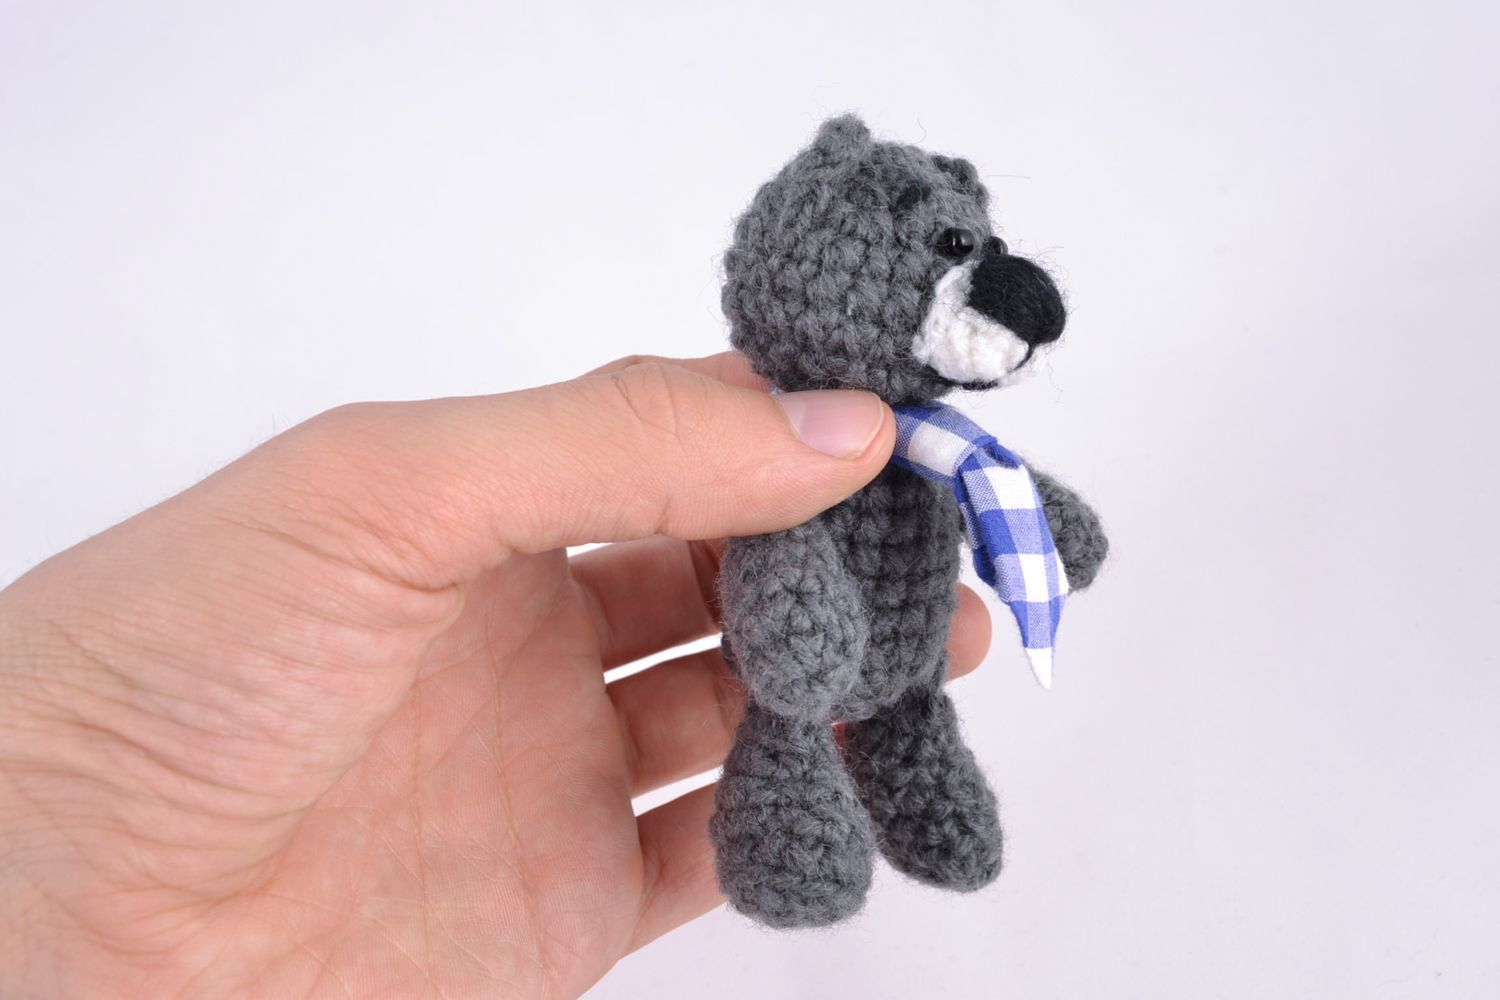 Handmade toy crocheted in the shape of bear photo 2